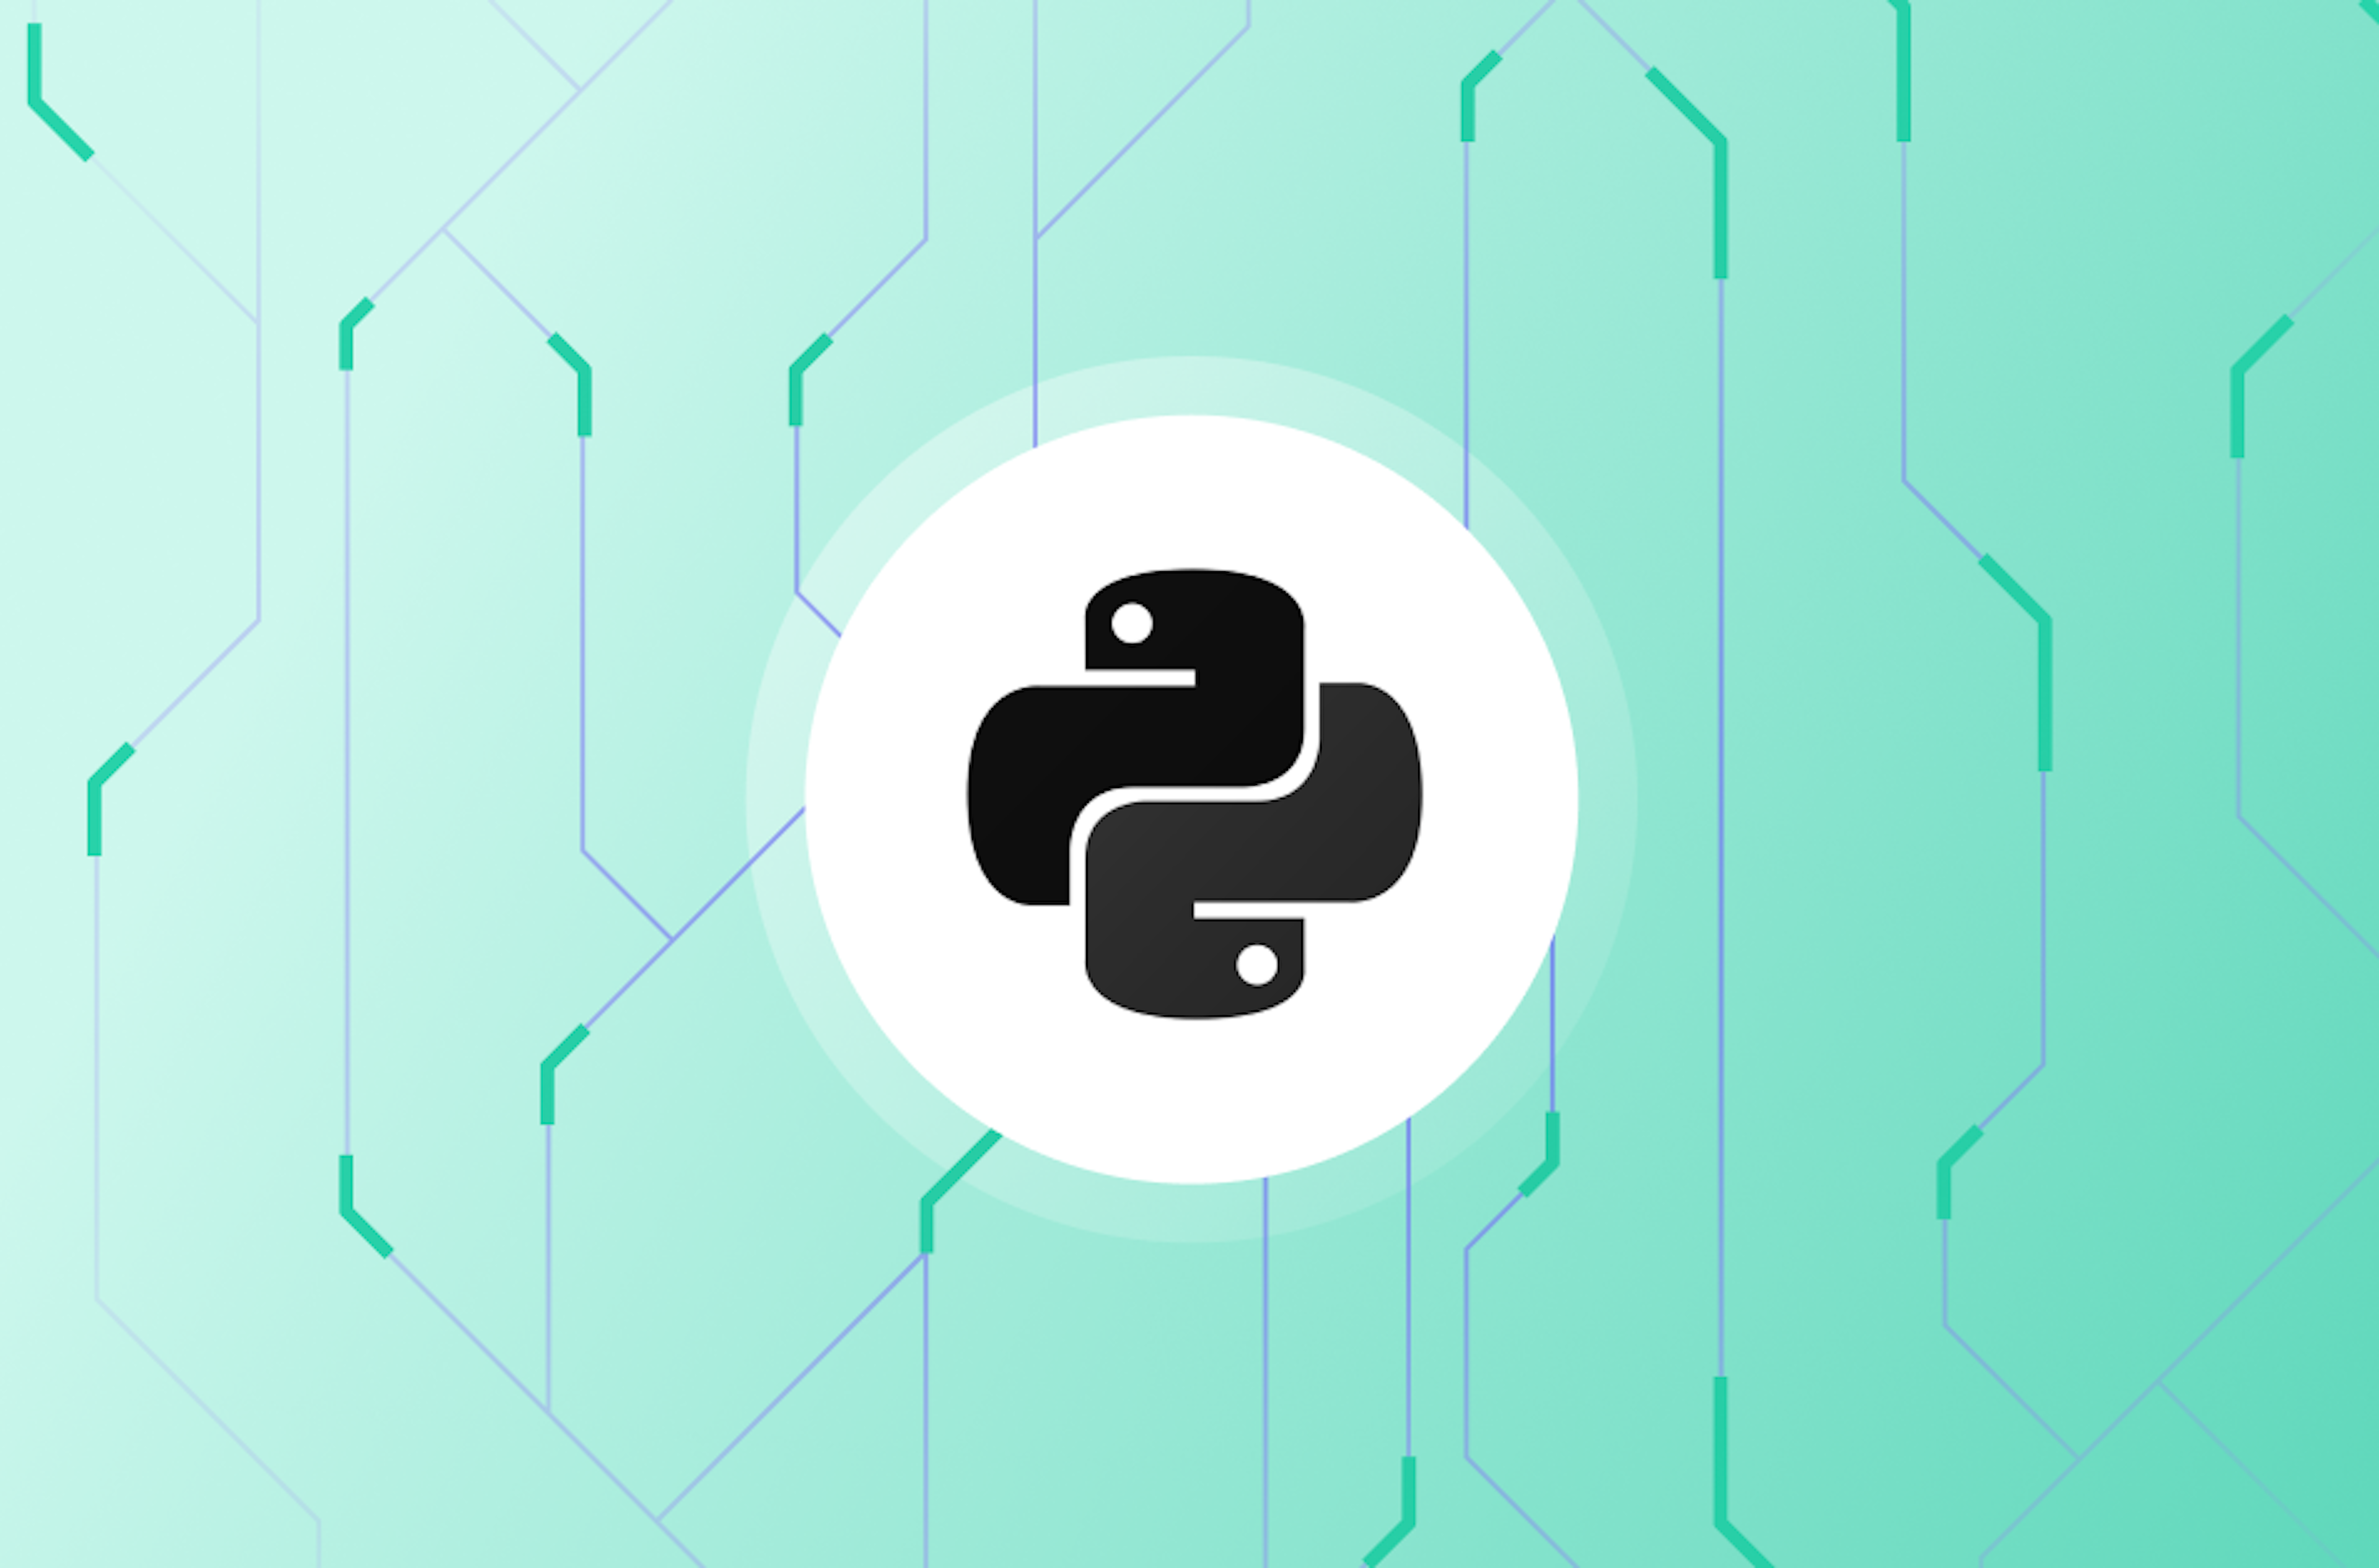 Top 10 Python libraries of 2017